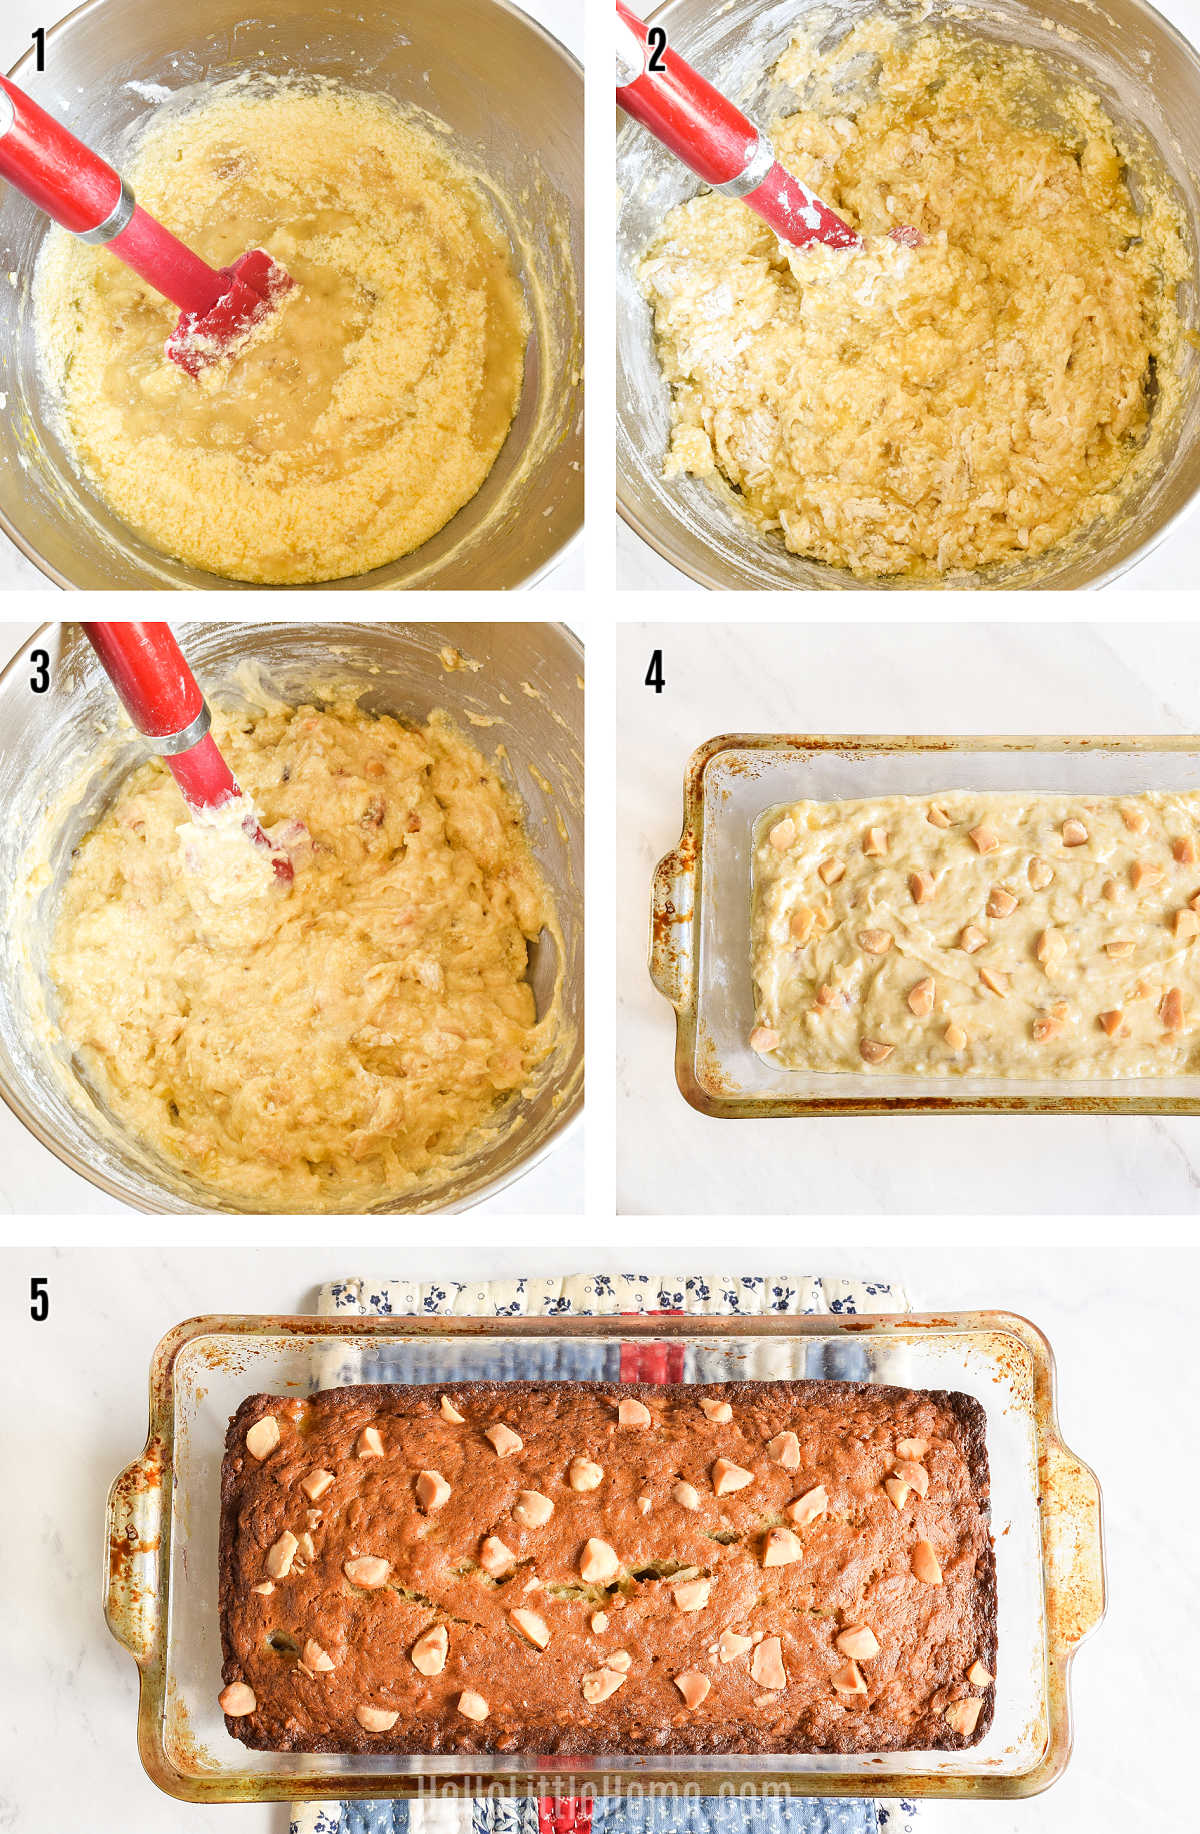 A photo collage showing how to make Coconut Banana Bread step-by-step.